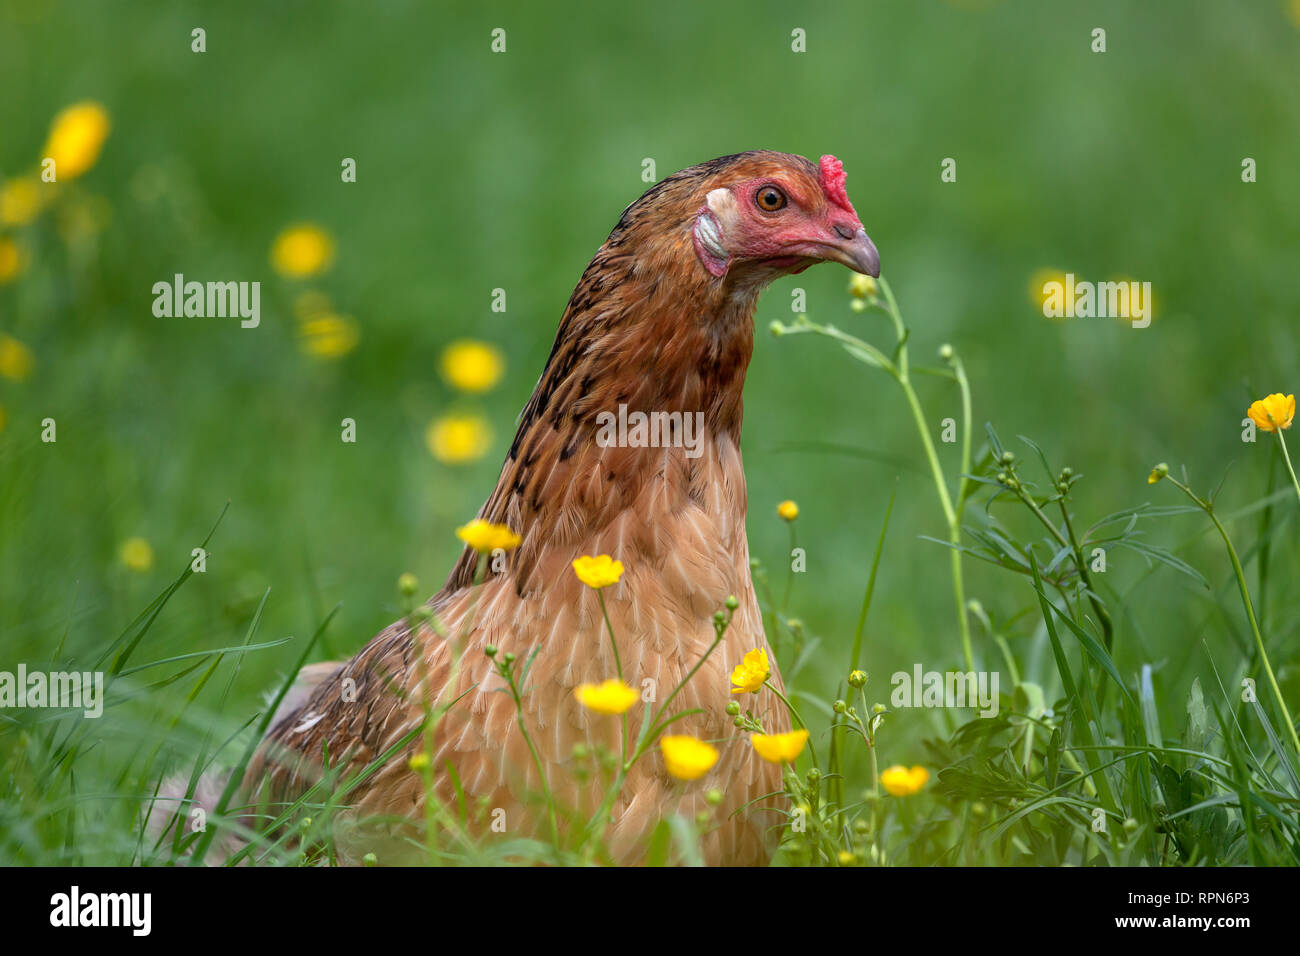 Zoologia / animali, uccelli / uccelli (Aves), Gallina Araucana in free run sul prato, Additional-Rights-Clearance-Info-Not-Available Foto Stock